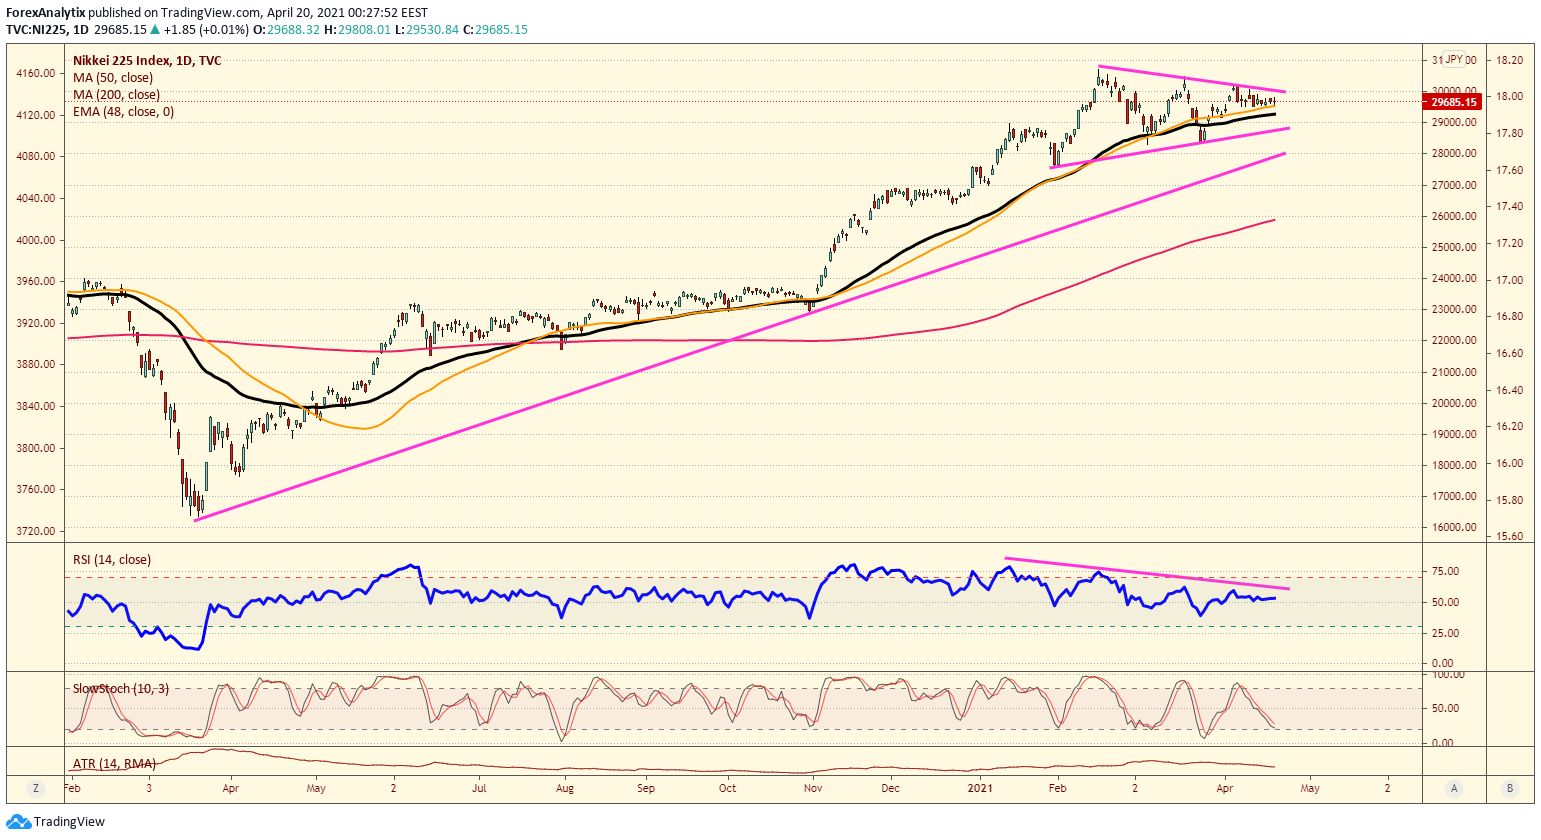 Nikkei 225 Index Daily Chart